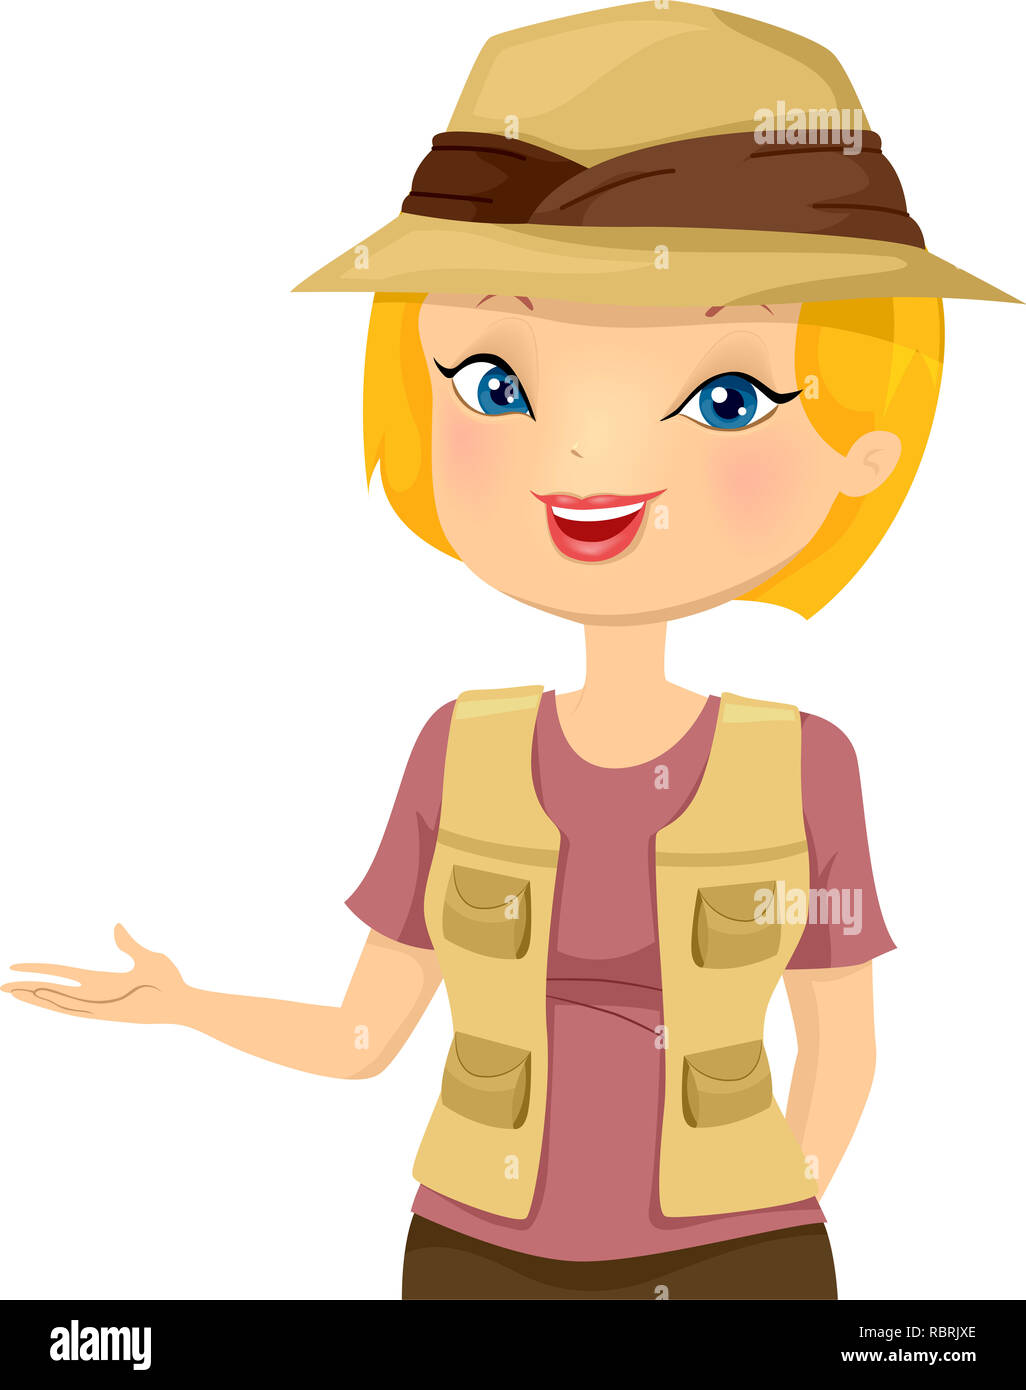 Illustration of a Girl Wearing Safari Hat Speaking and Working as a Tour  Guide Stock Photo - Alamy